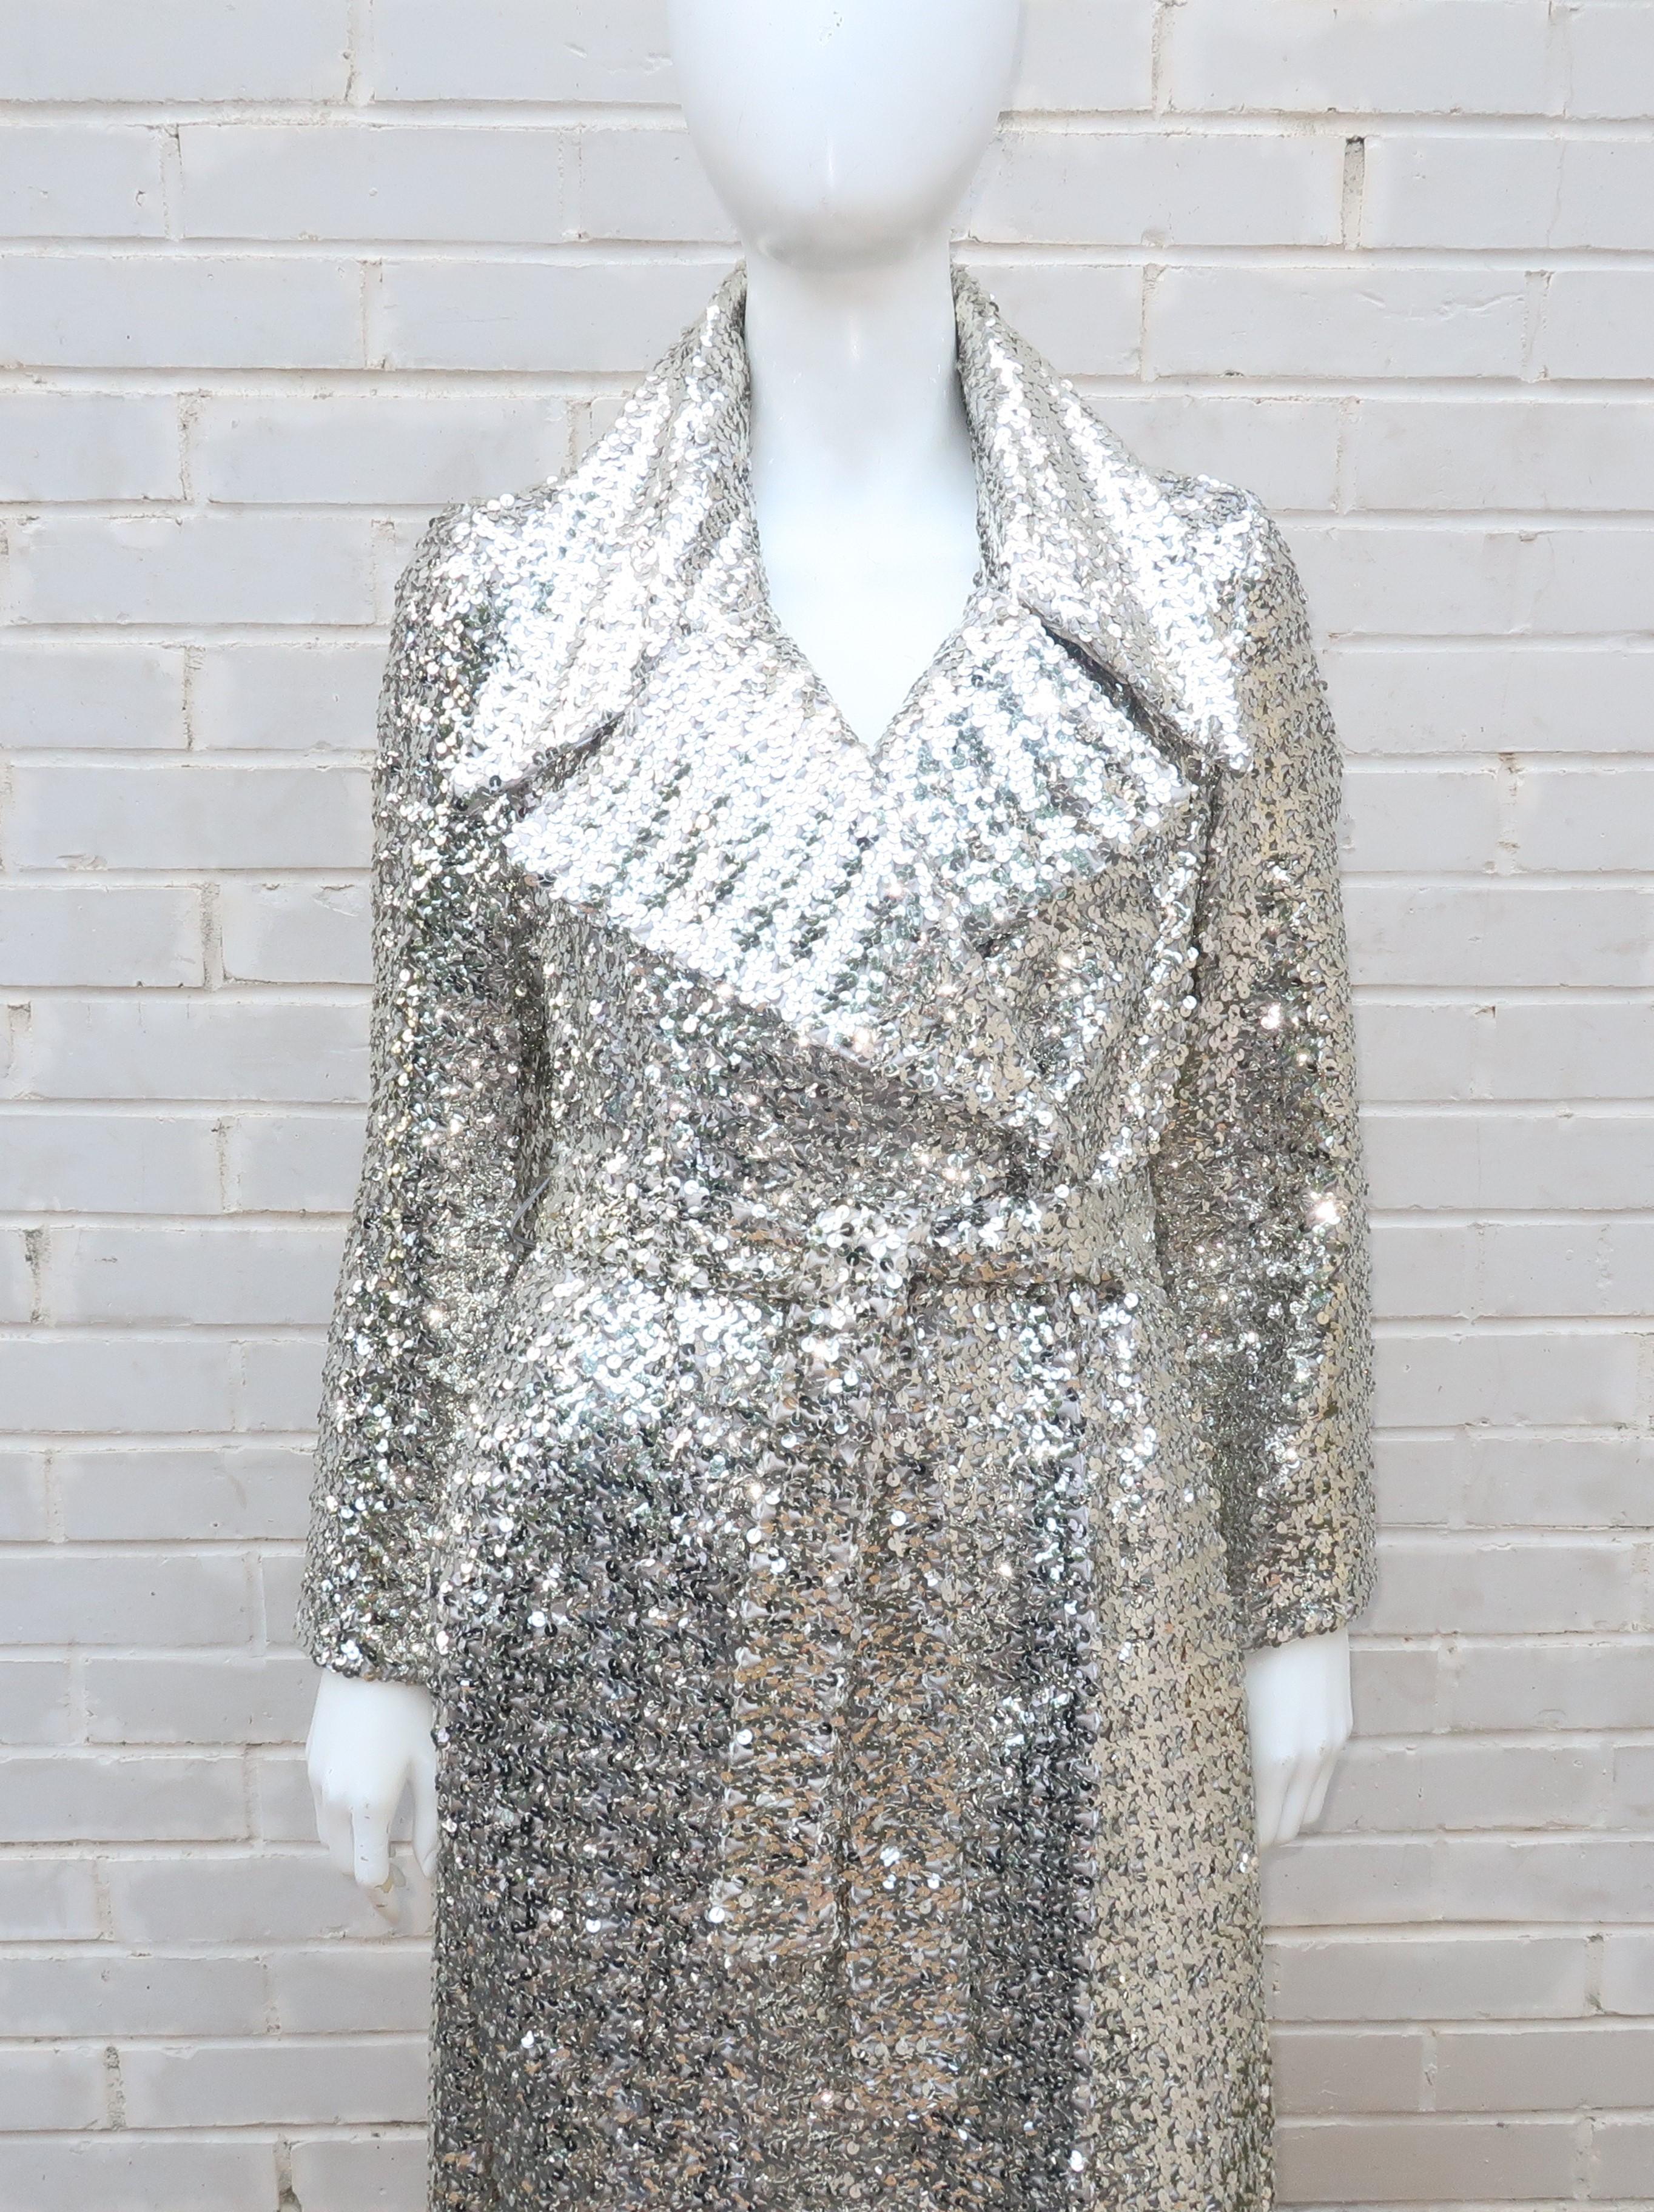 Don't save this one for a special occasion!  Wear it anytime and every time you want to make a splash.  This trench style coat is fully embellished with mirrored silver sequins and provides a 1970's period perfect look with an exaggerated collar and